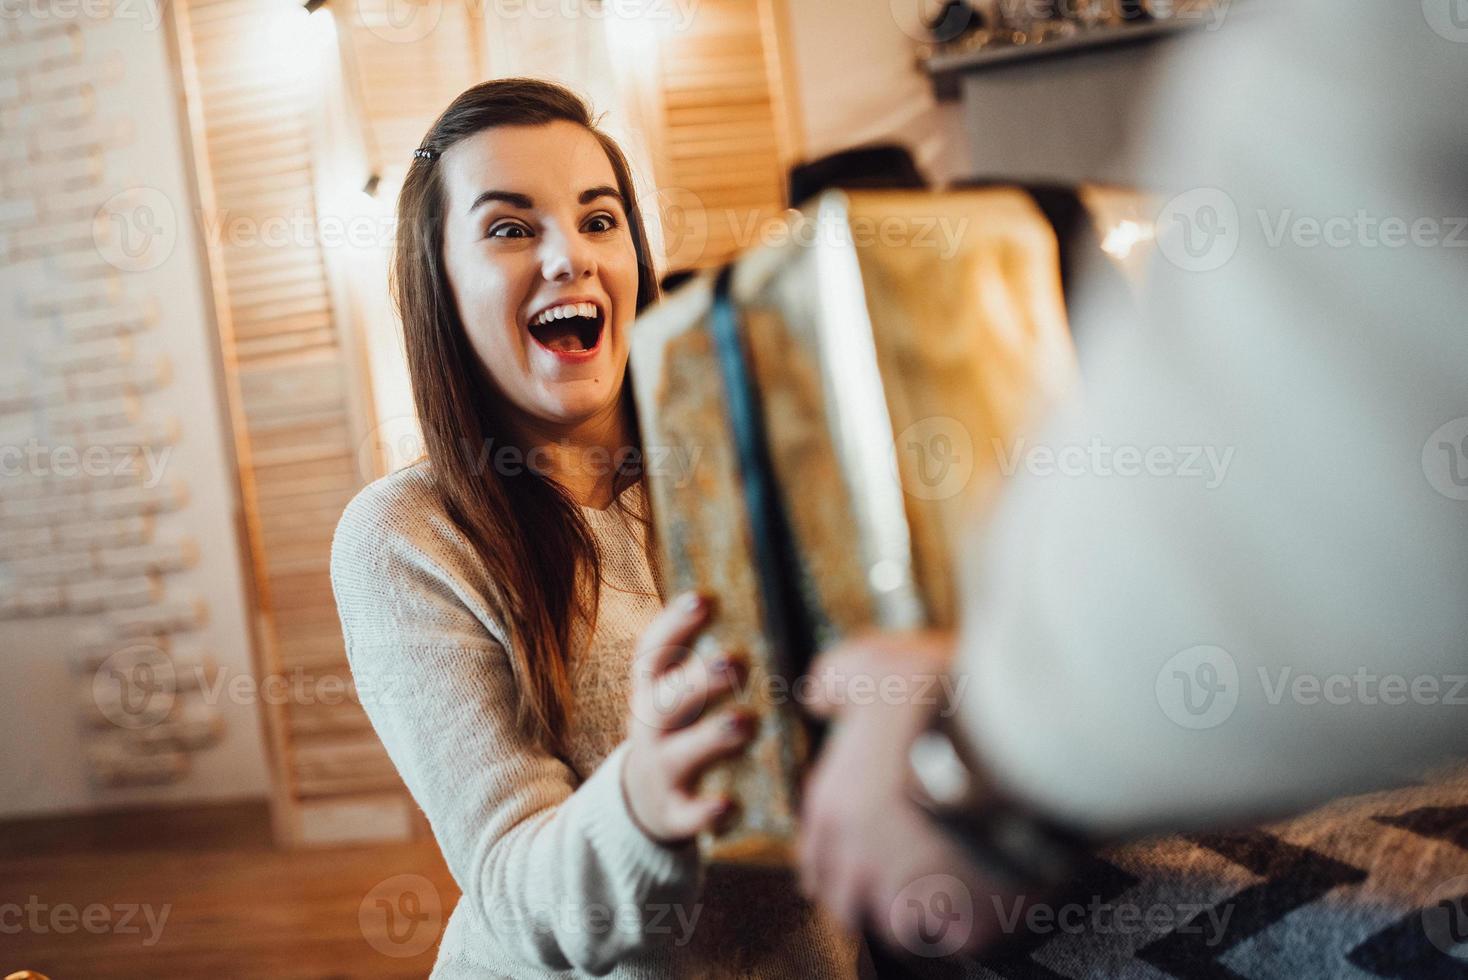 guy and a girl celebrate the new year together and give each other gifts photo